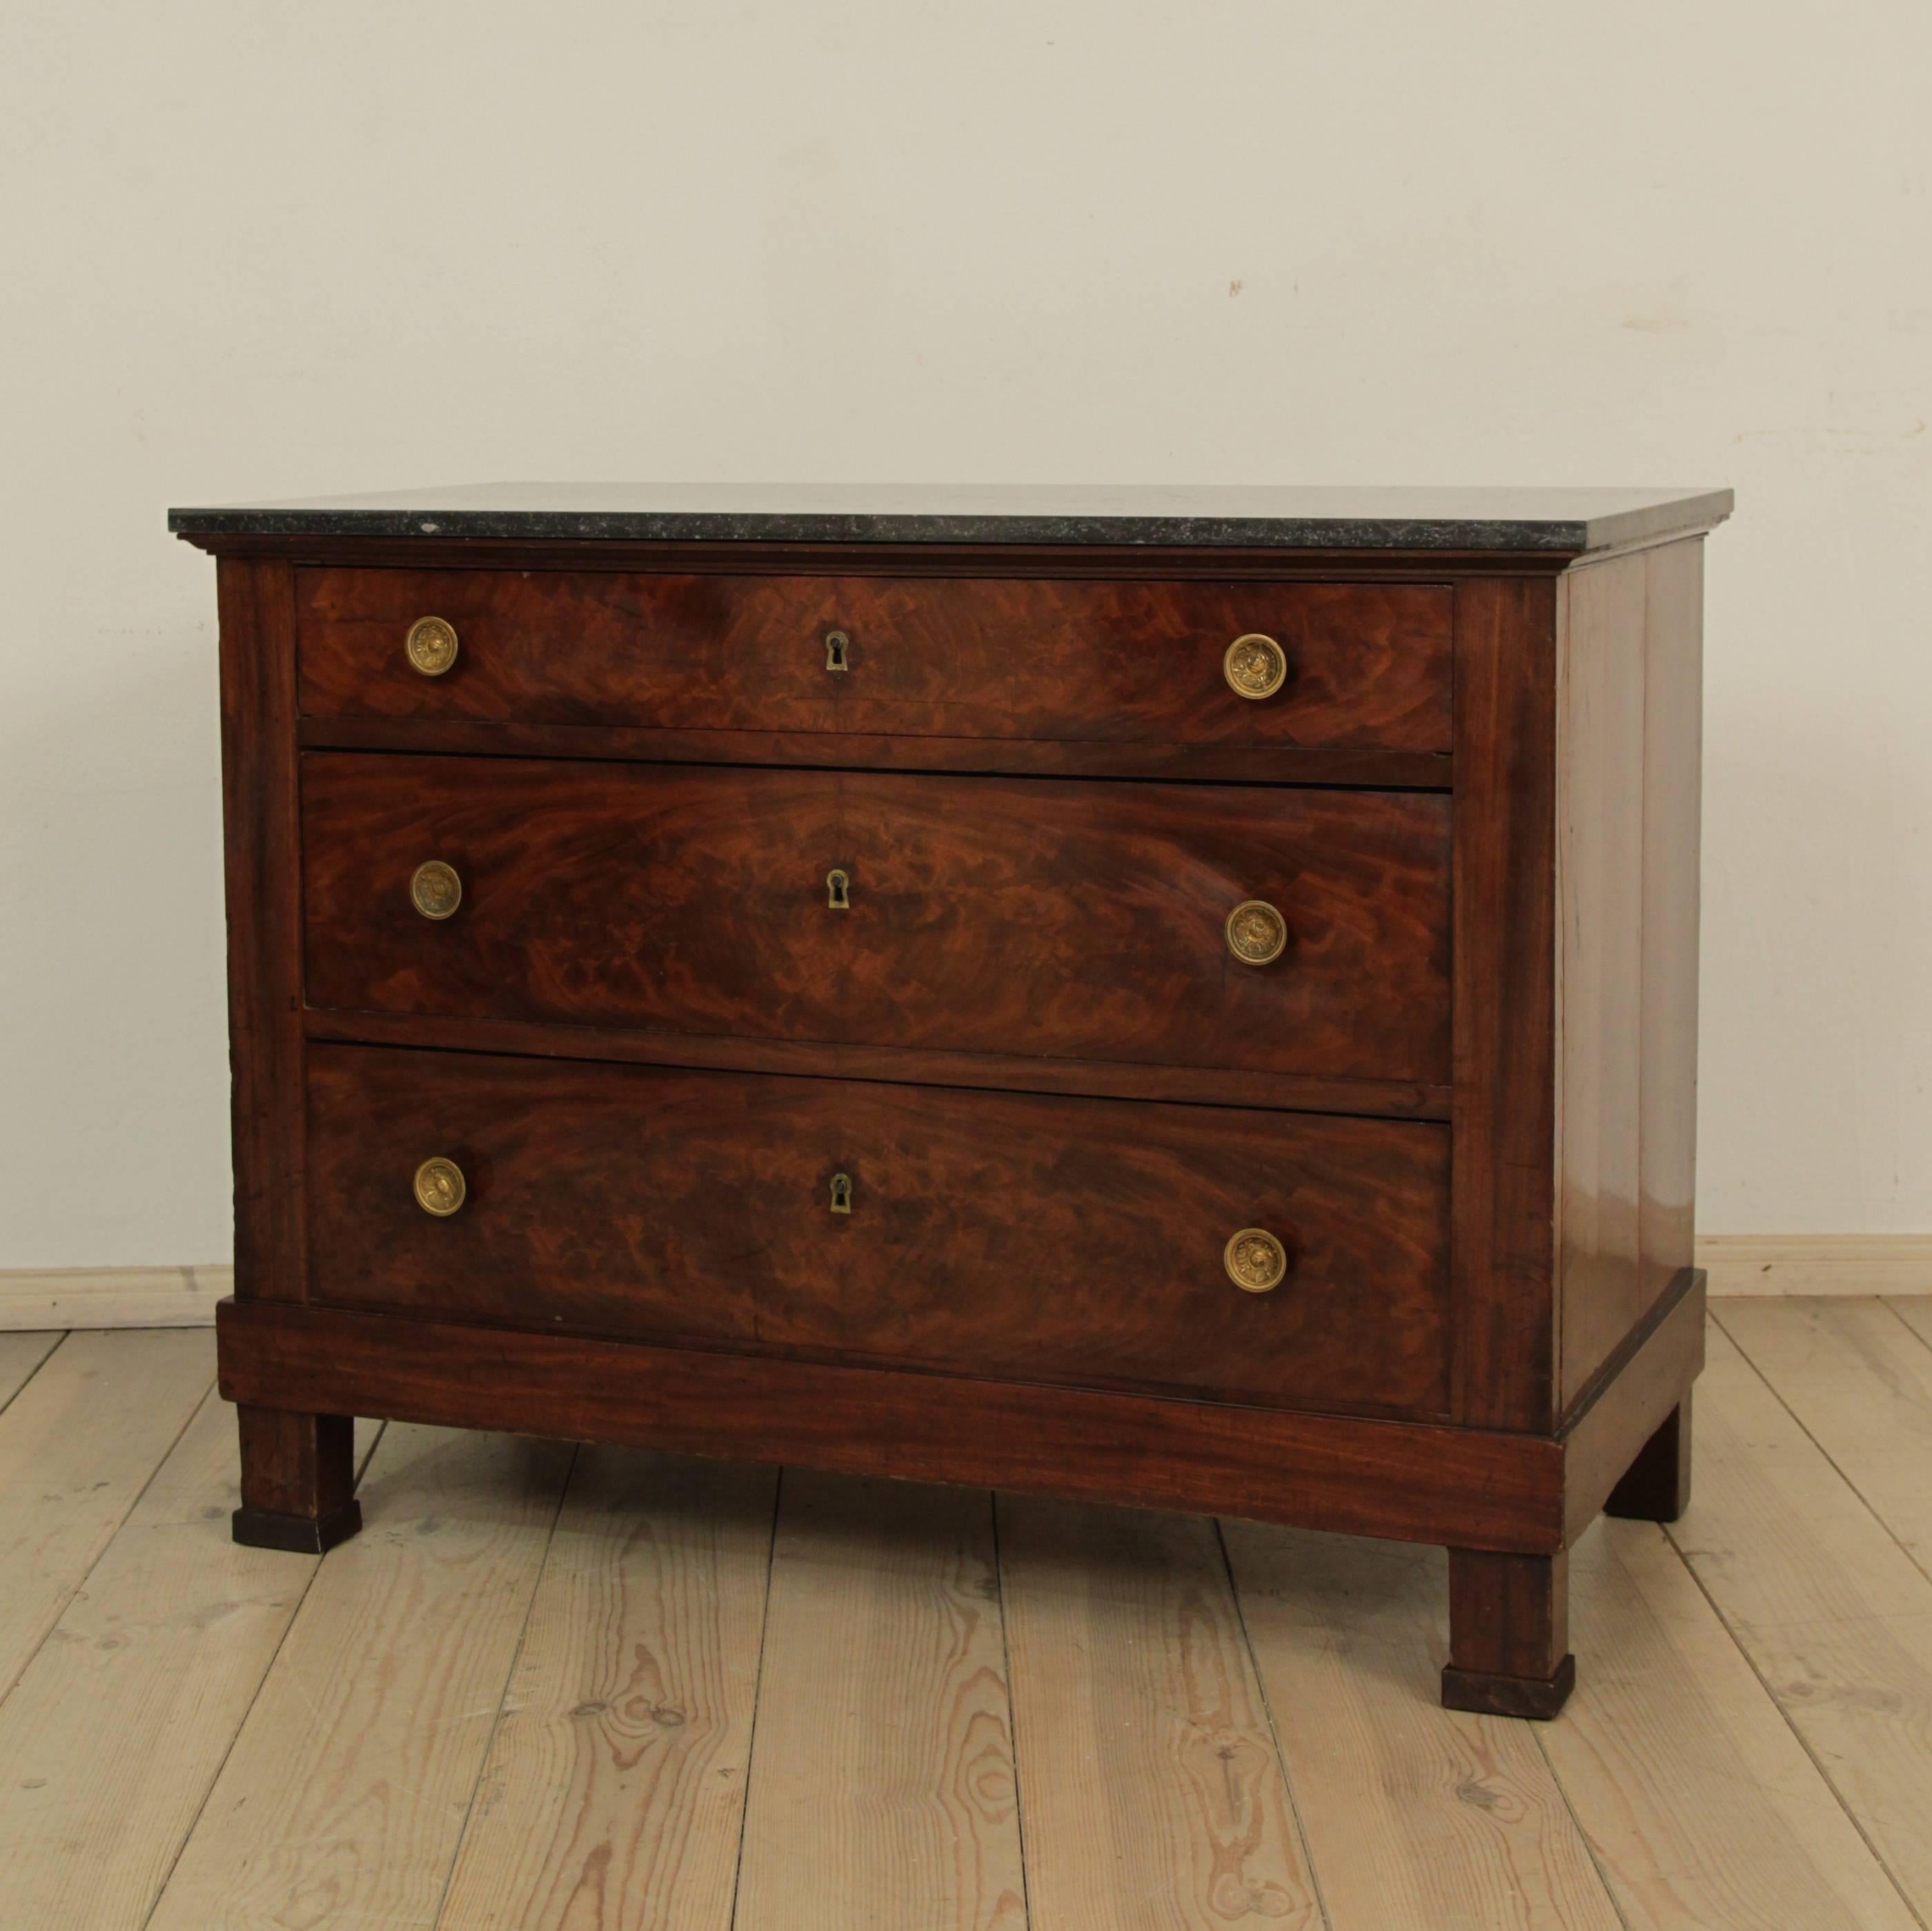 This French Empire commode is circa 1800. It is mahogany on oak with the original fittings and a later marble-top. The keys are missing. It is in a very good original condition.